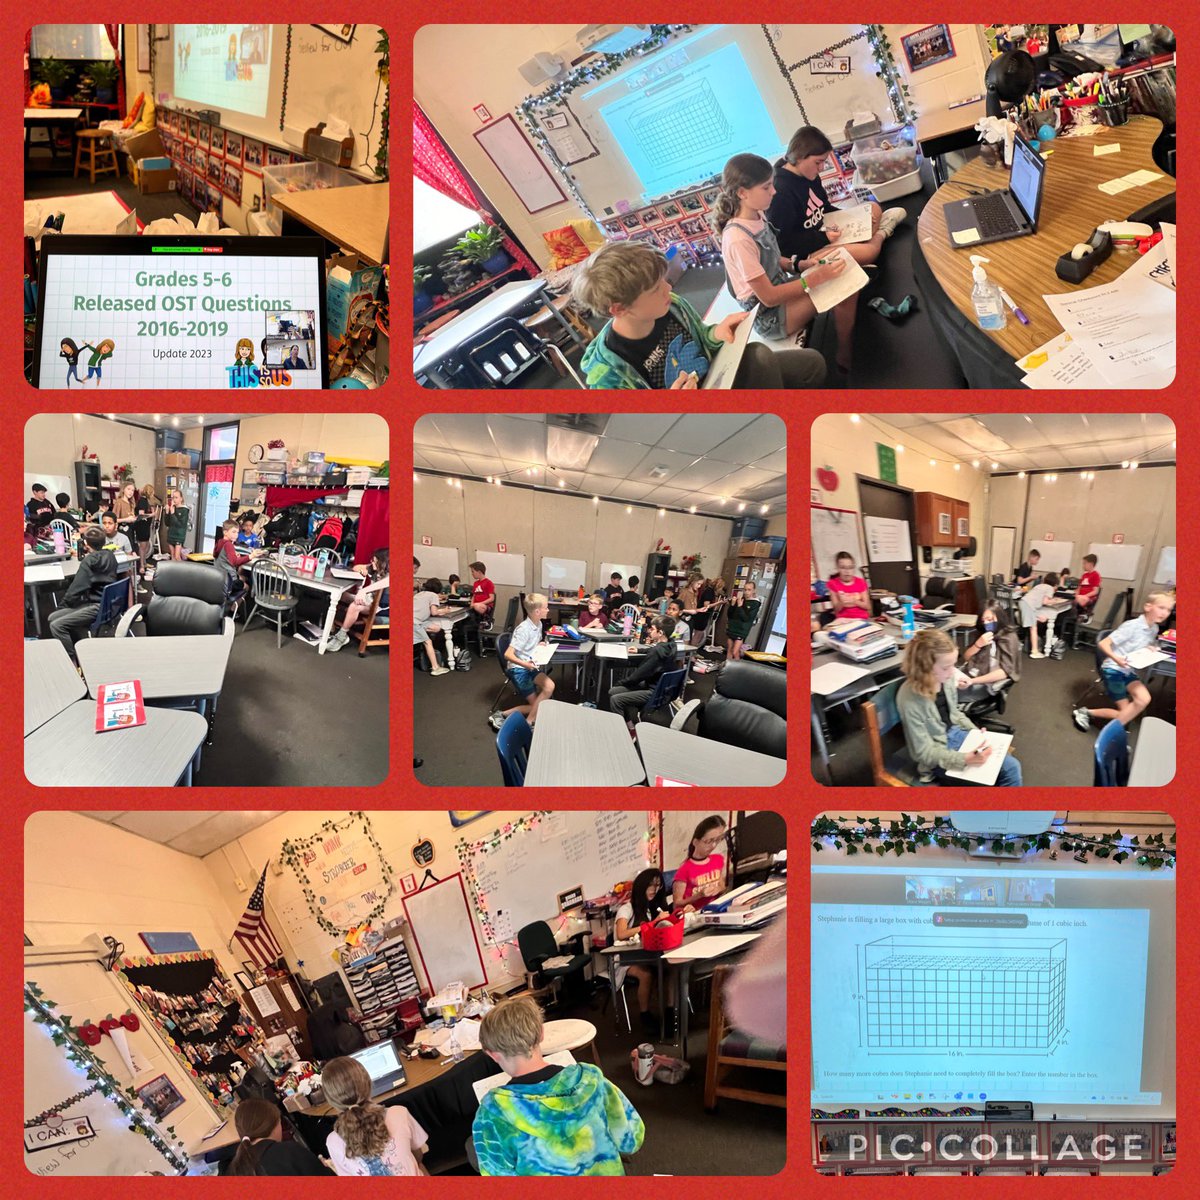 5th grade math plus at Adena meets 5/6 gifted at Patrick Henry  School District through zoom! Each group collaborated on an OST question! #WEareLakota #PHStrong 
@AdenaElementary @Adena_AP @DRobertsGIS @KlemanLisa @PHMiddleSchool